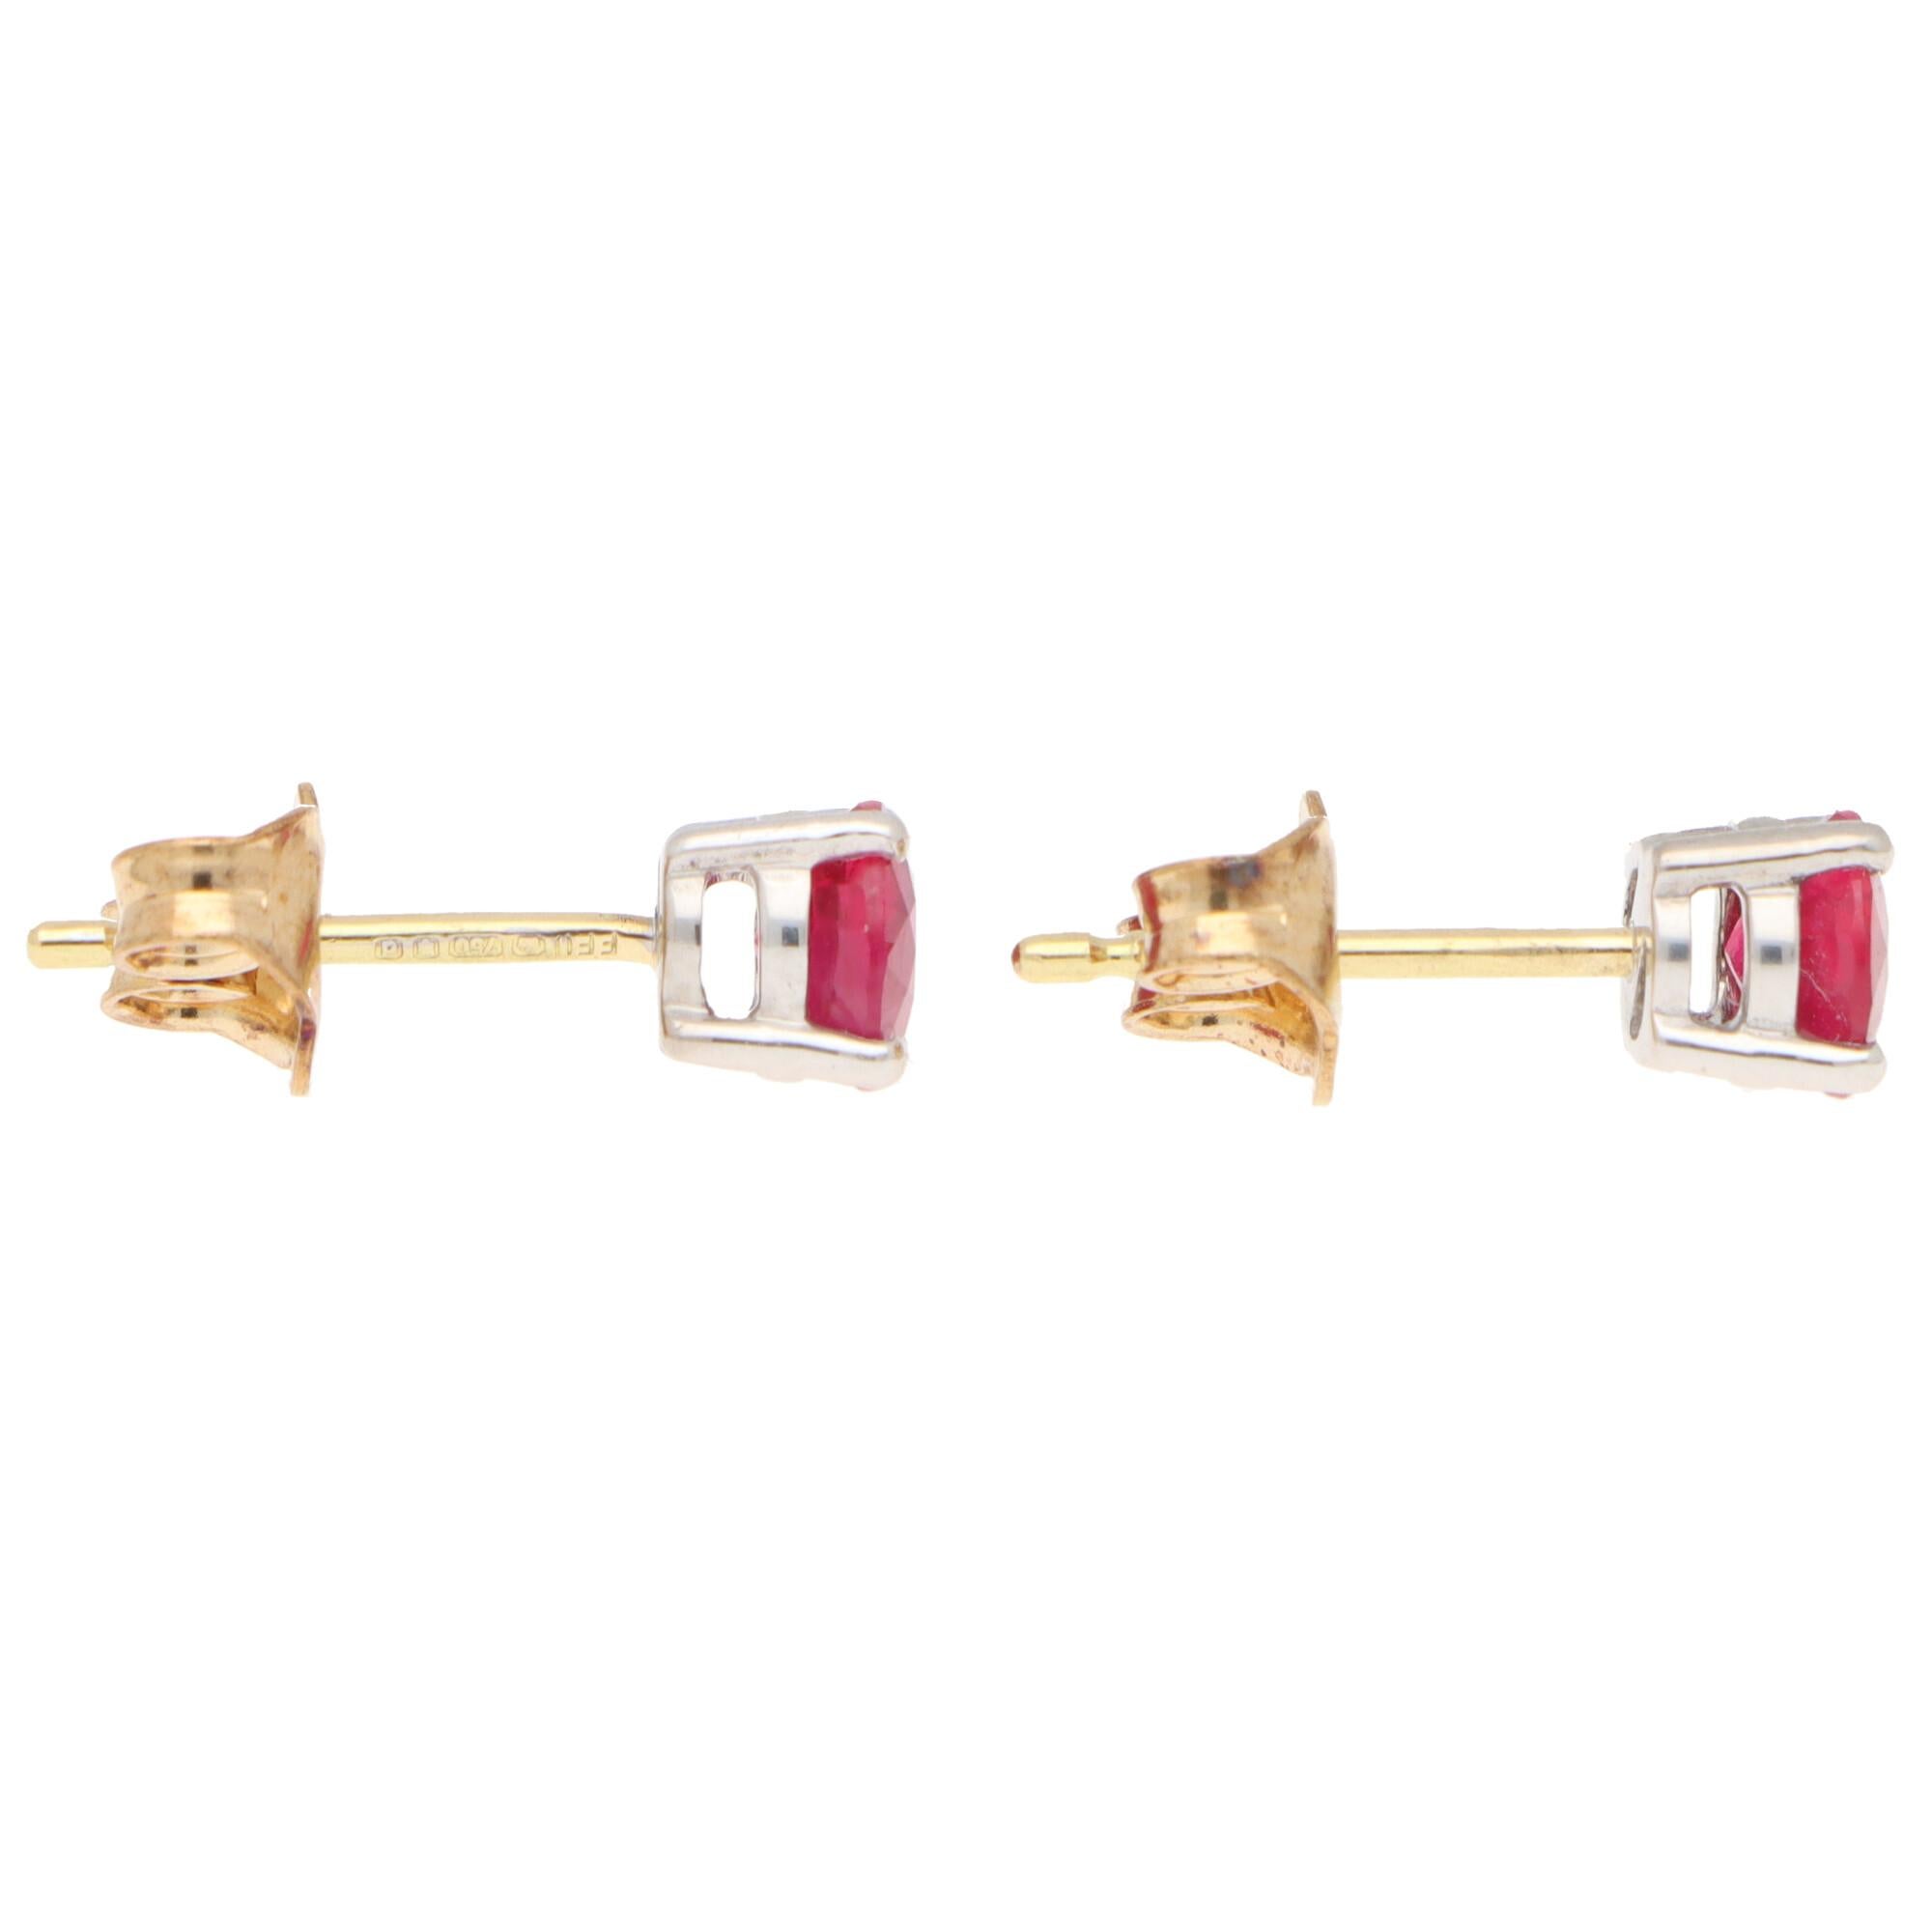 Women's or Men's Round Cut 1.15ct Red Ruby Stud Earrings Set in 18k Yellow and White Gold